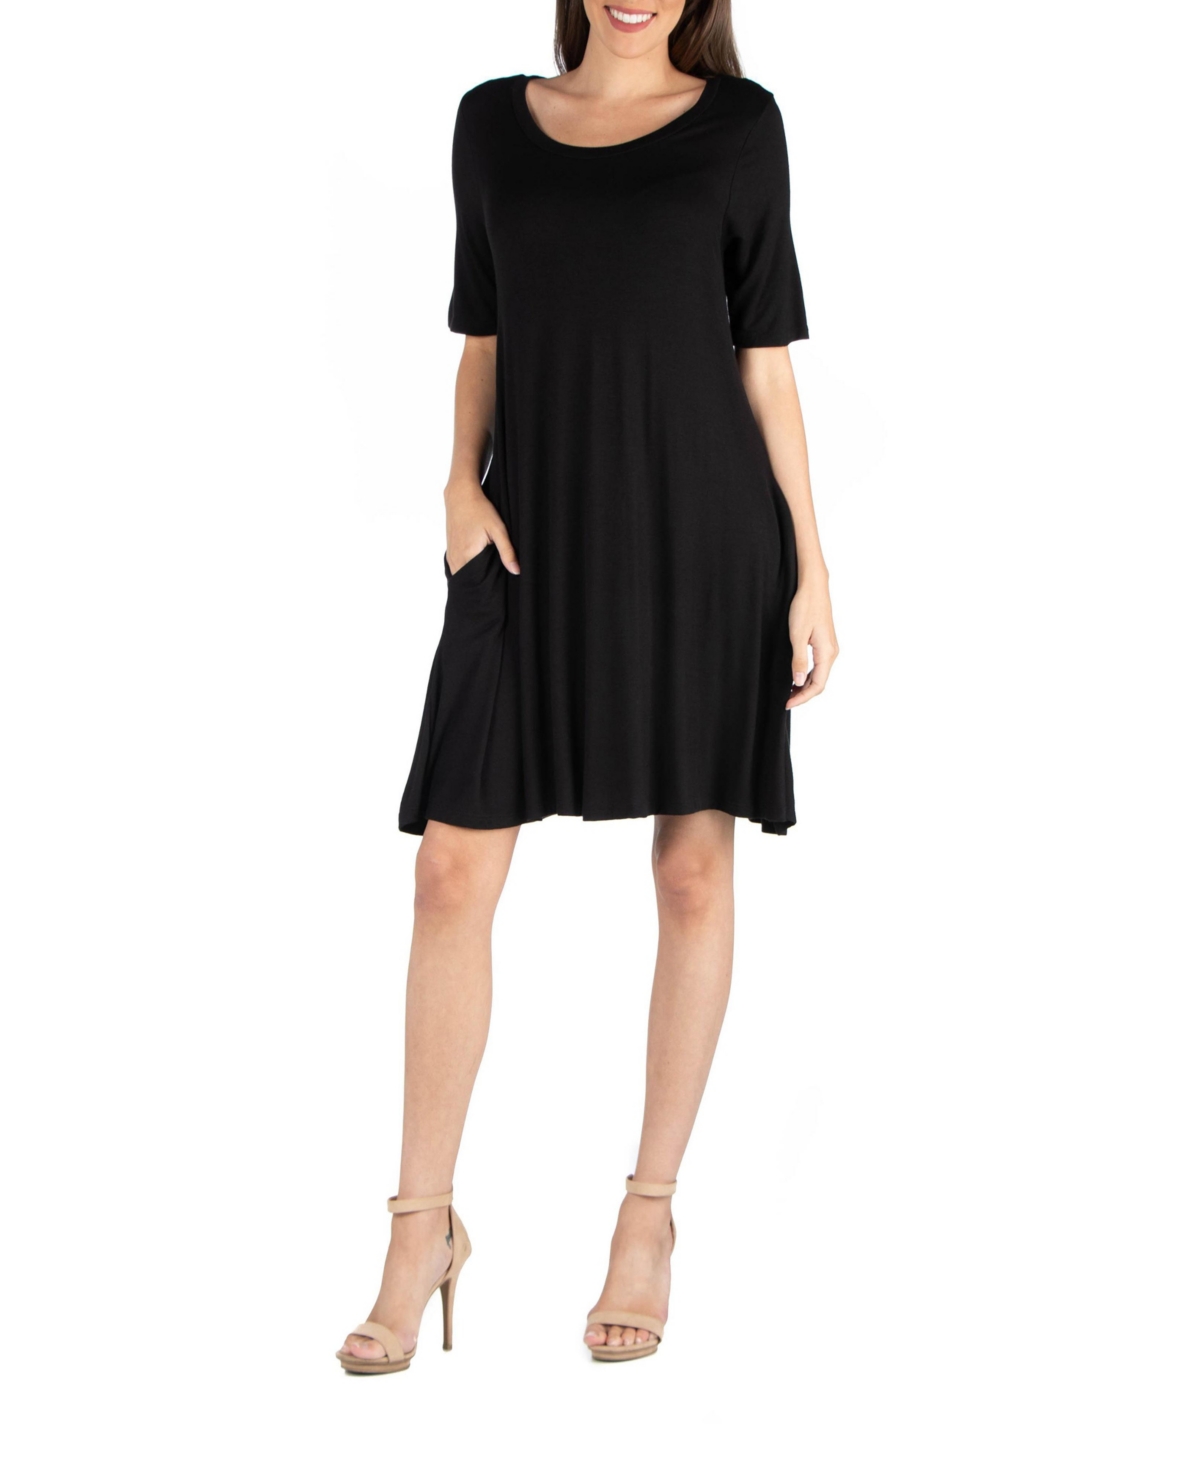 24seven Comfort Apparel Women's Soft Flare T-shirt Dress With Pocket Detail In Black